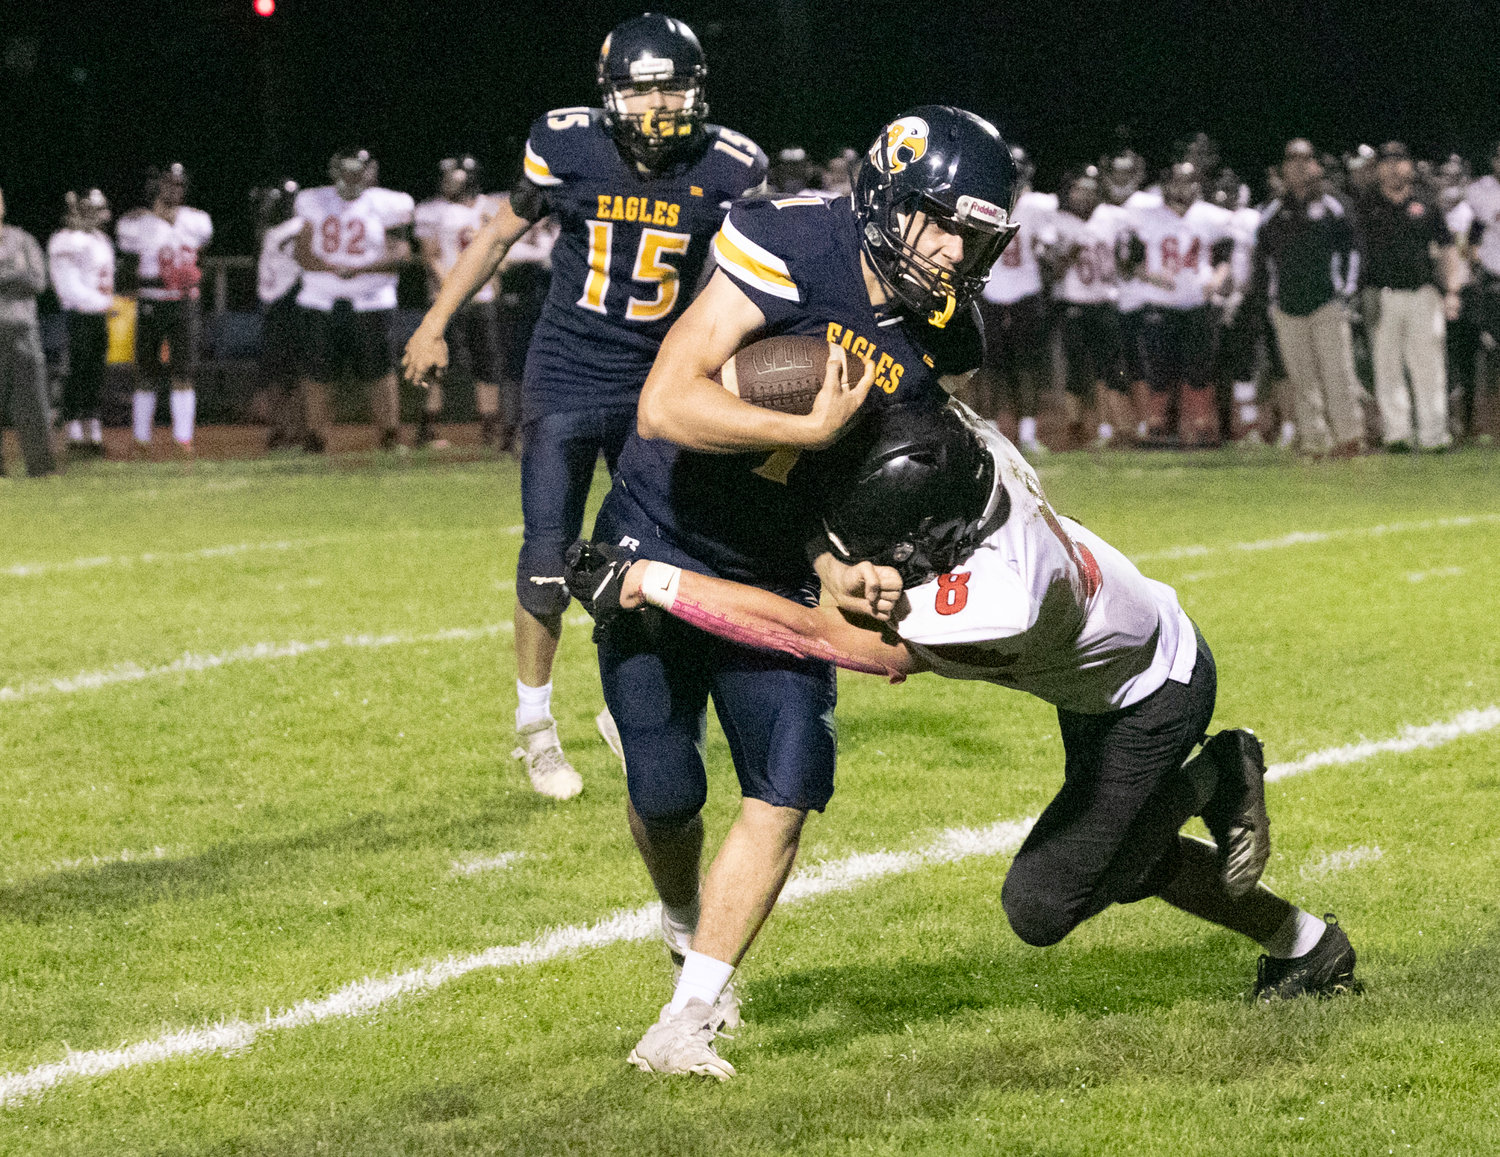 Barrington's Tommy Feroce tries to break a tackle during Friday night's game.